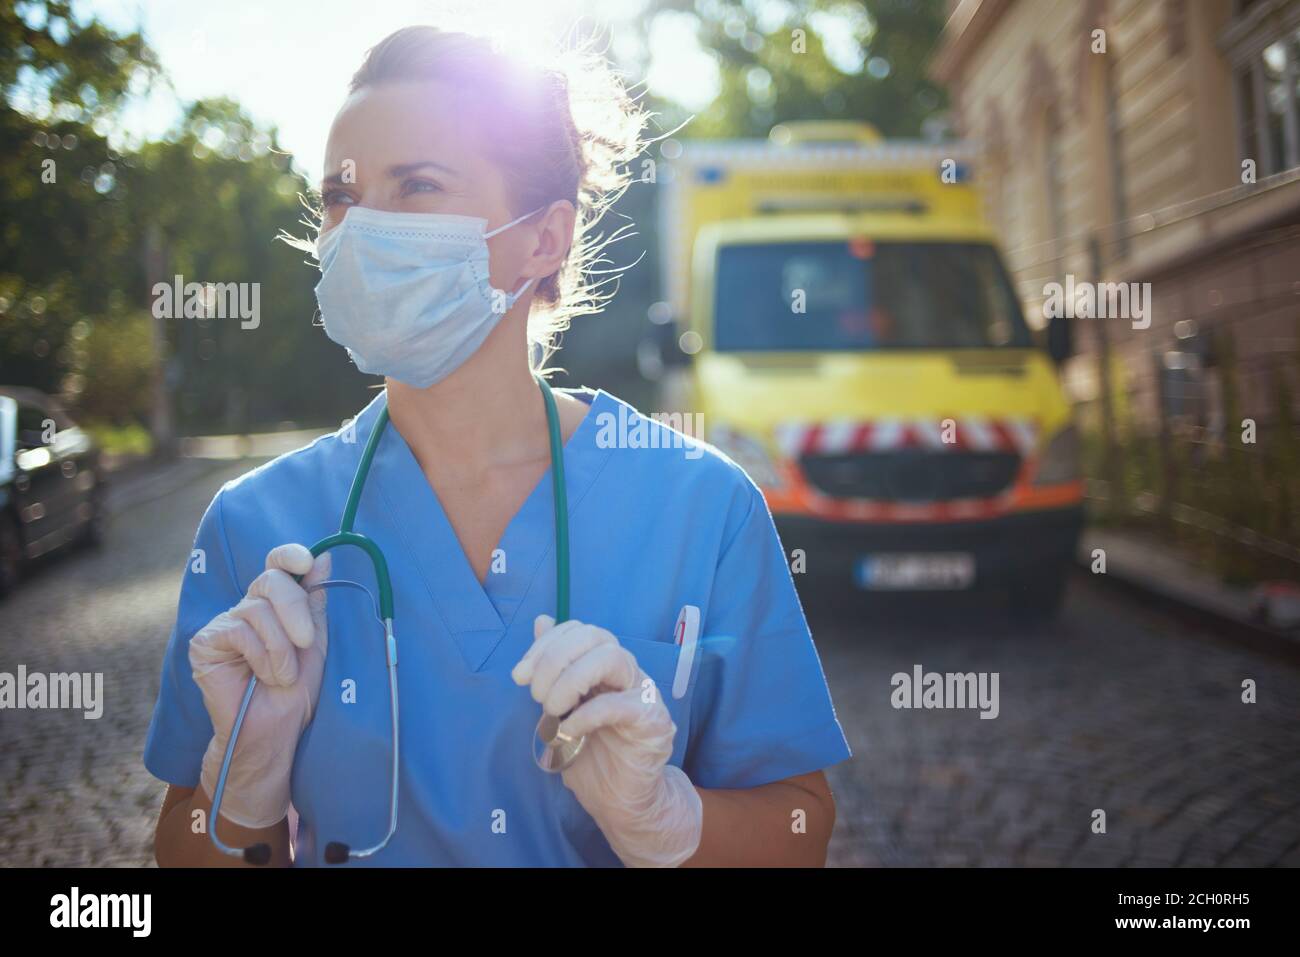 coronavirus pandemic. modern paramedic woman in uniform with stethoscope and medical mask looking into the distance outside near ambulance. Stock Photo